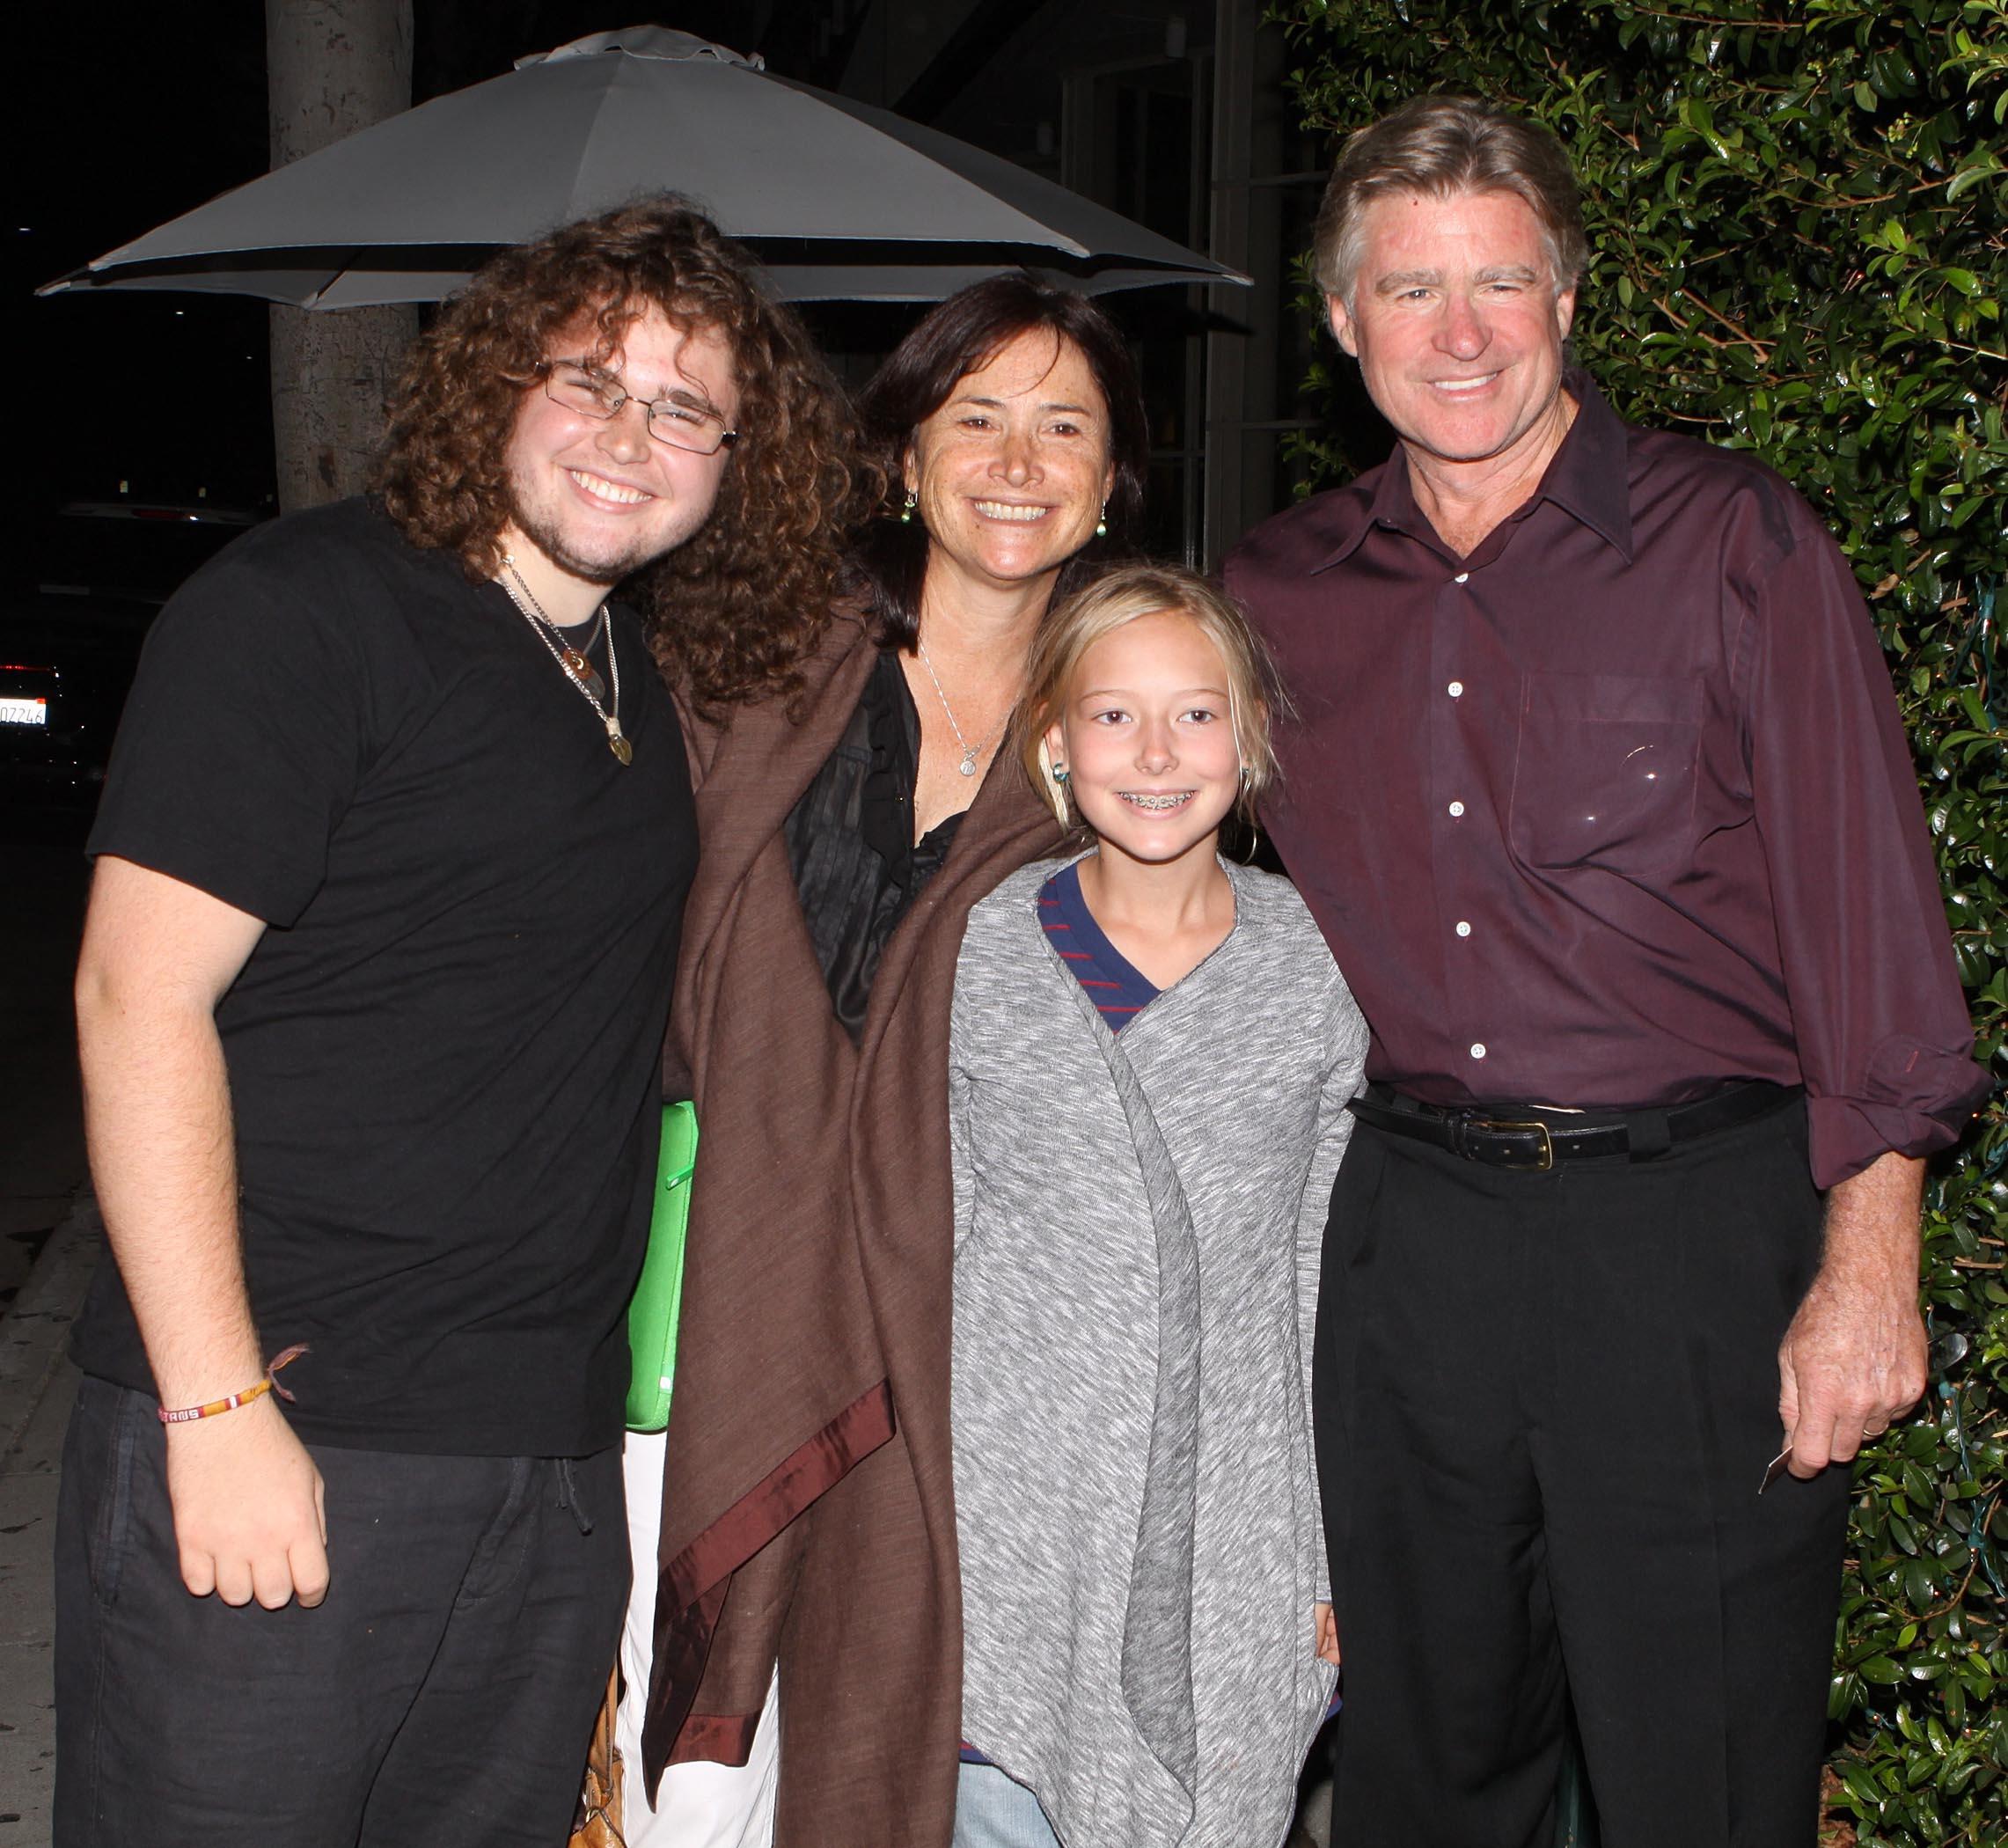 The late Treat Williams with family